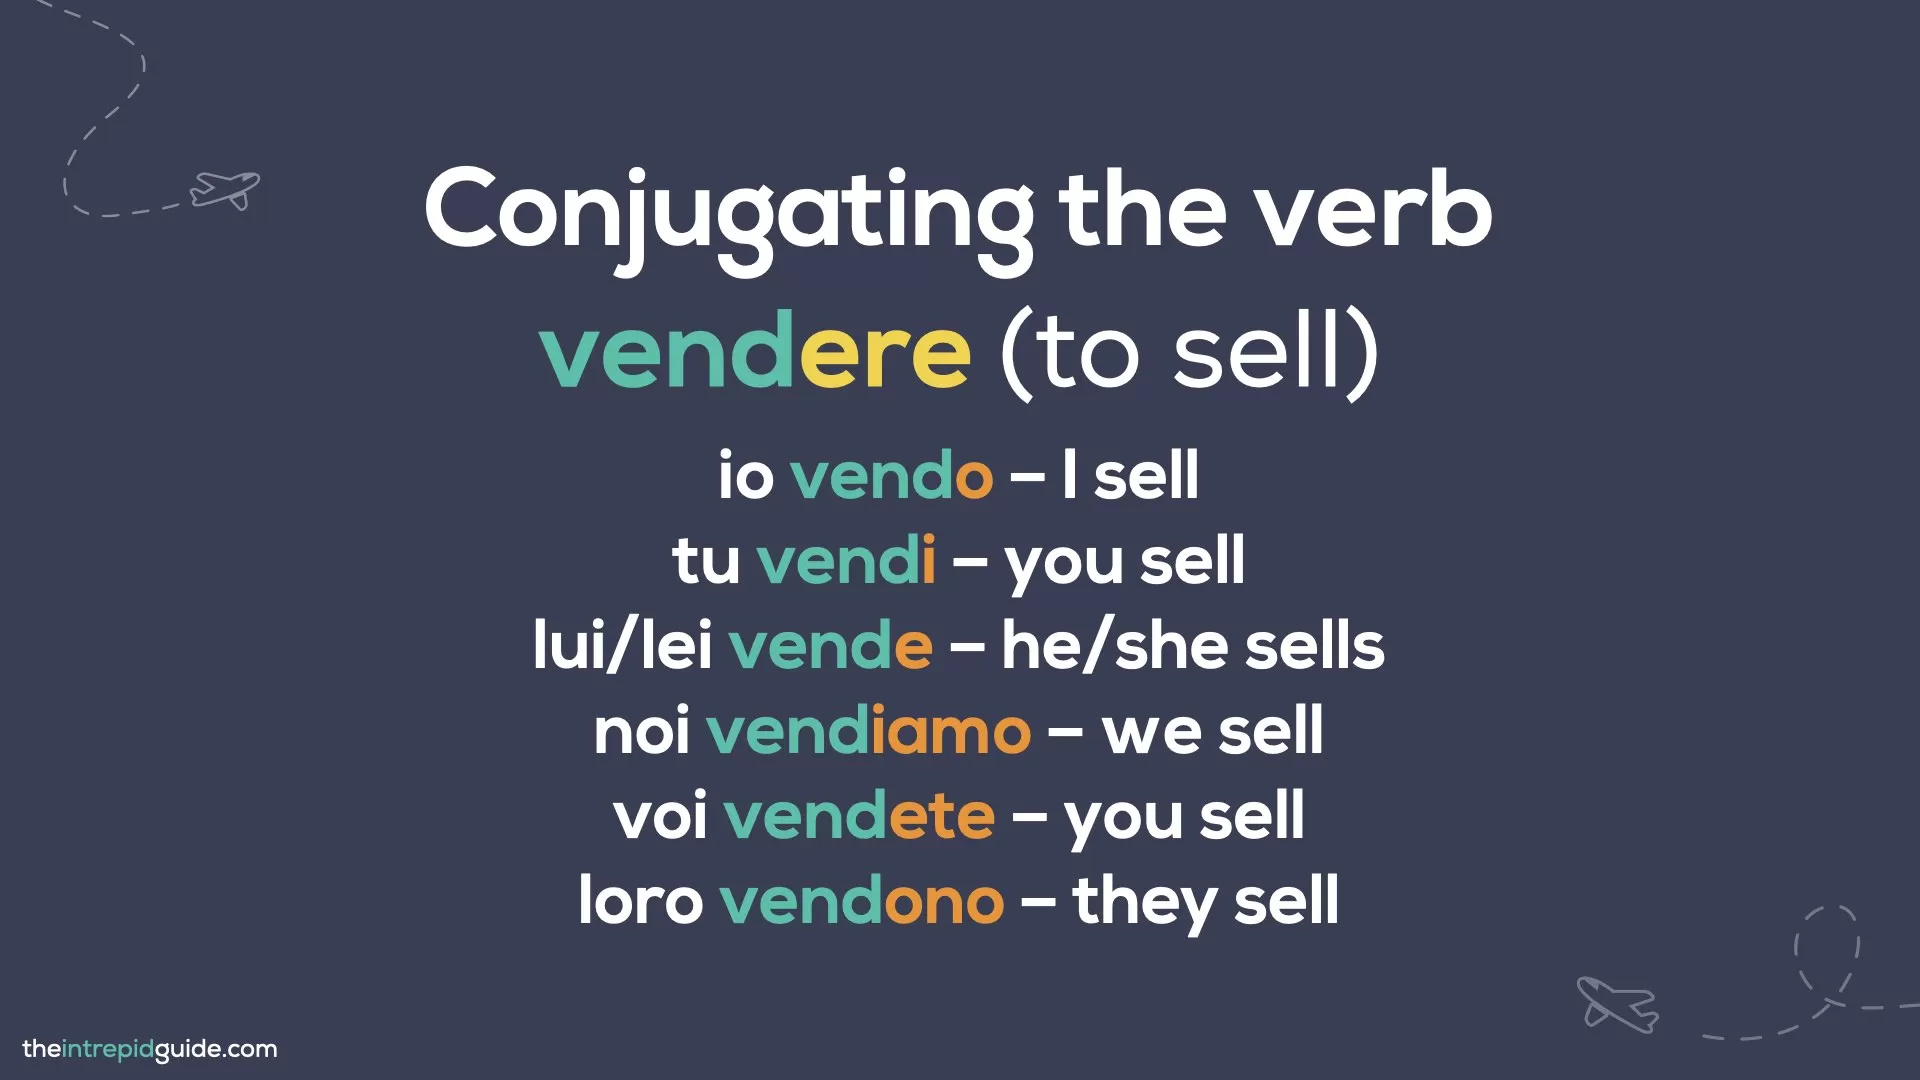 How to Conjugate Italian Verbs - Conjugating the verb vendere - to sell